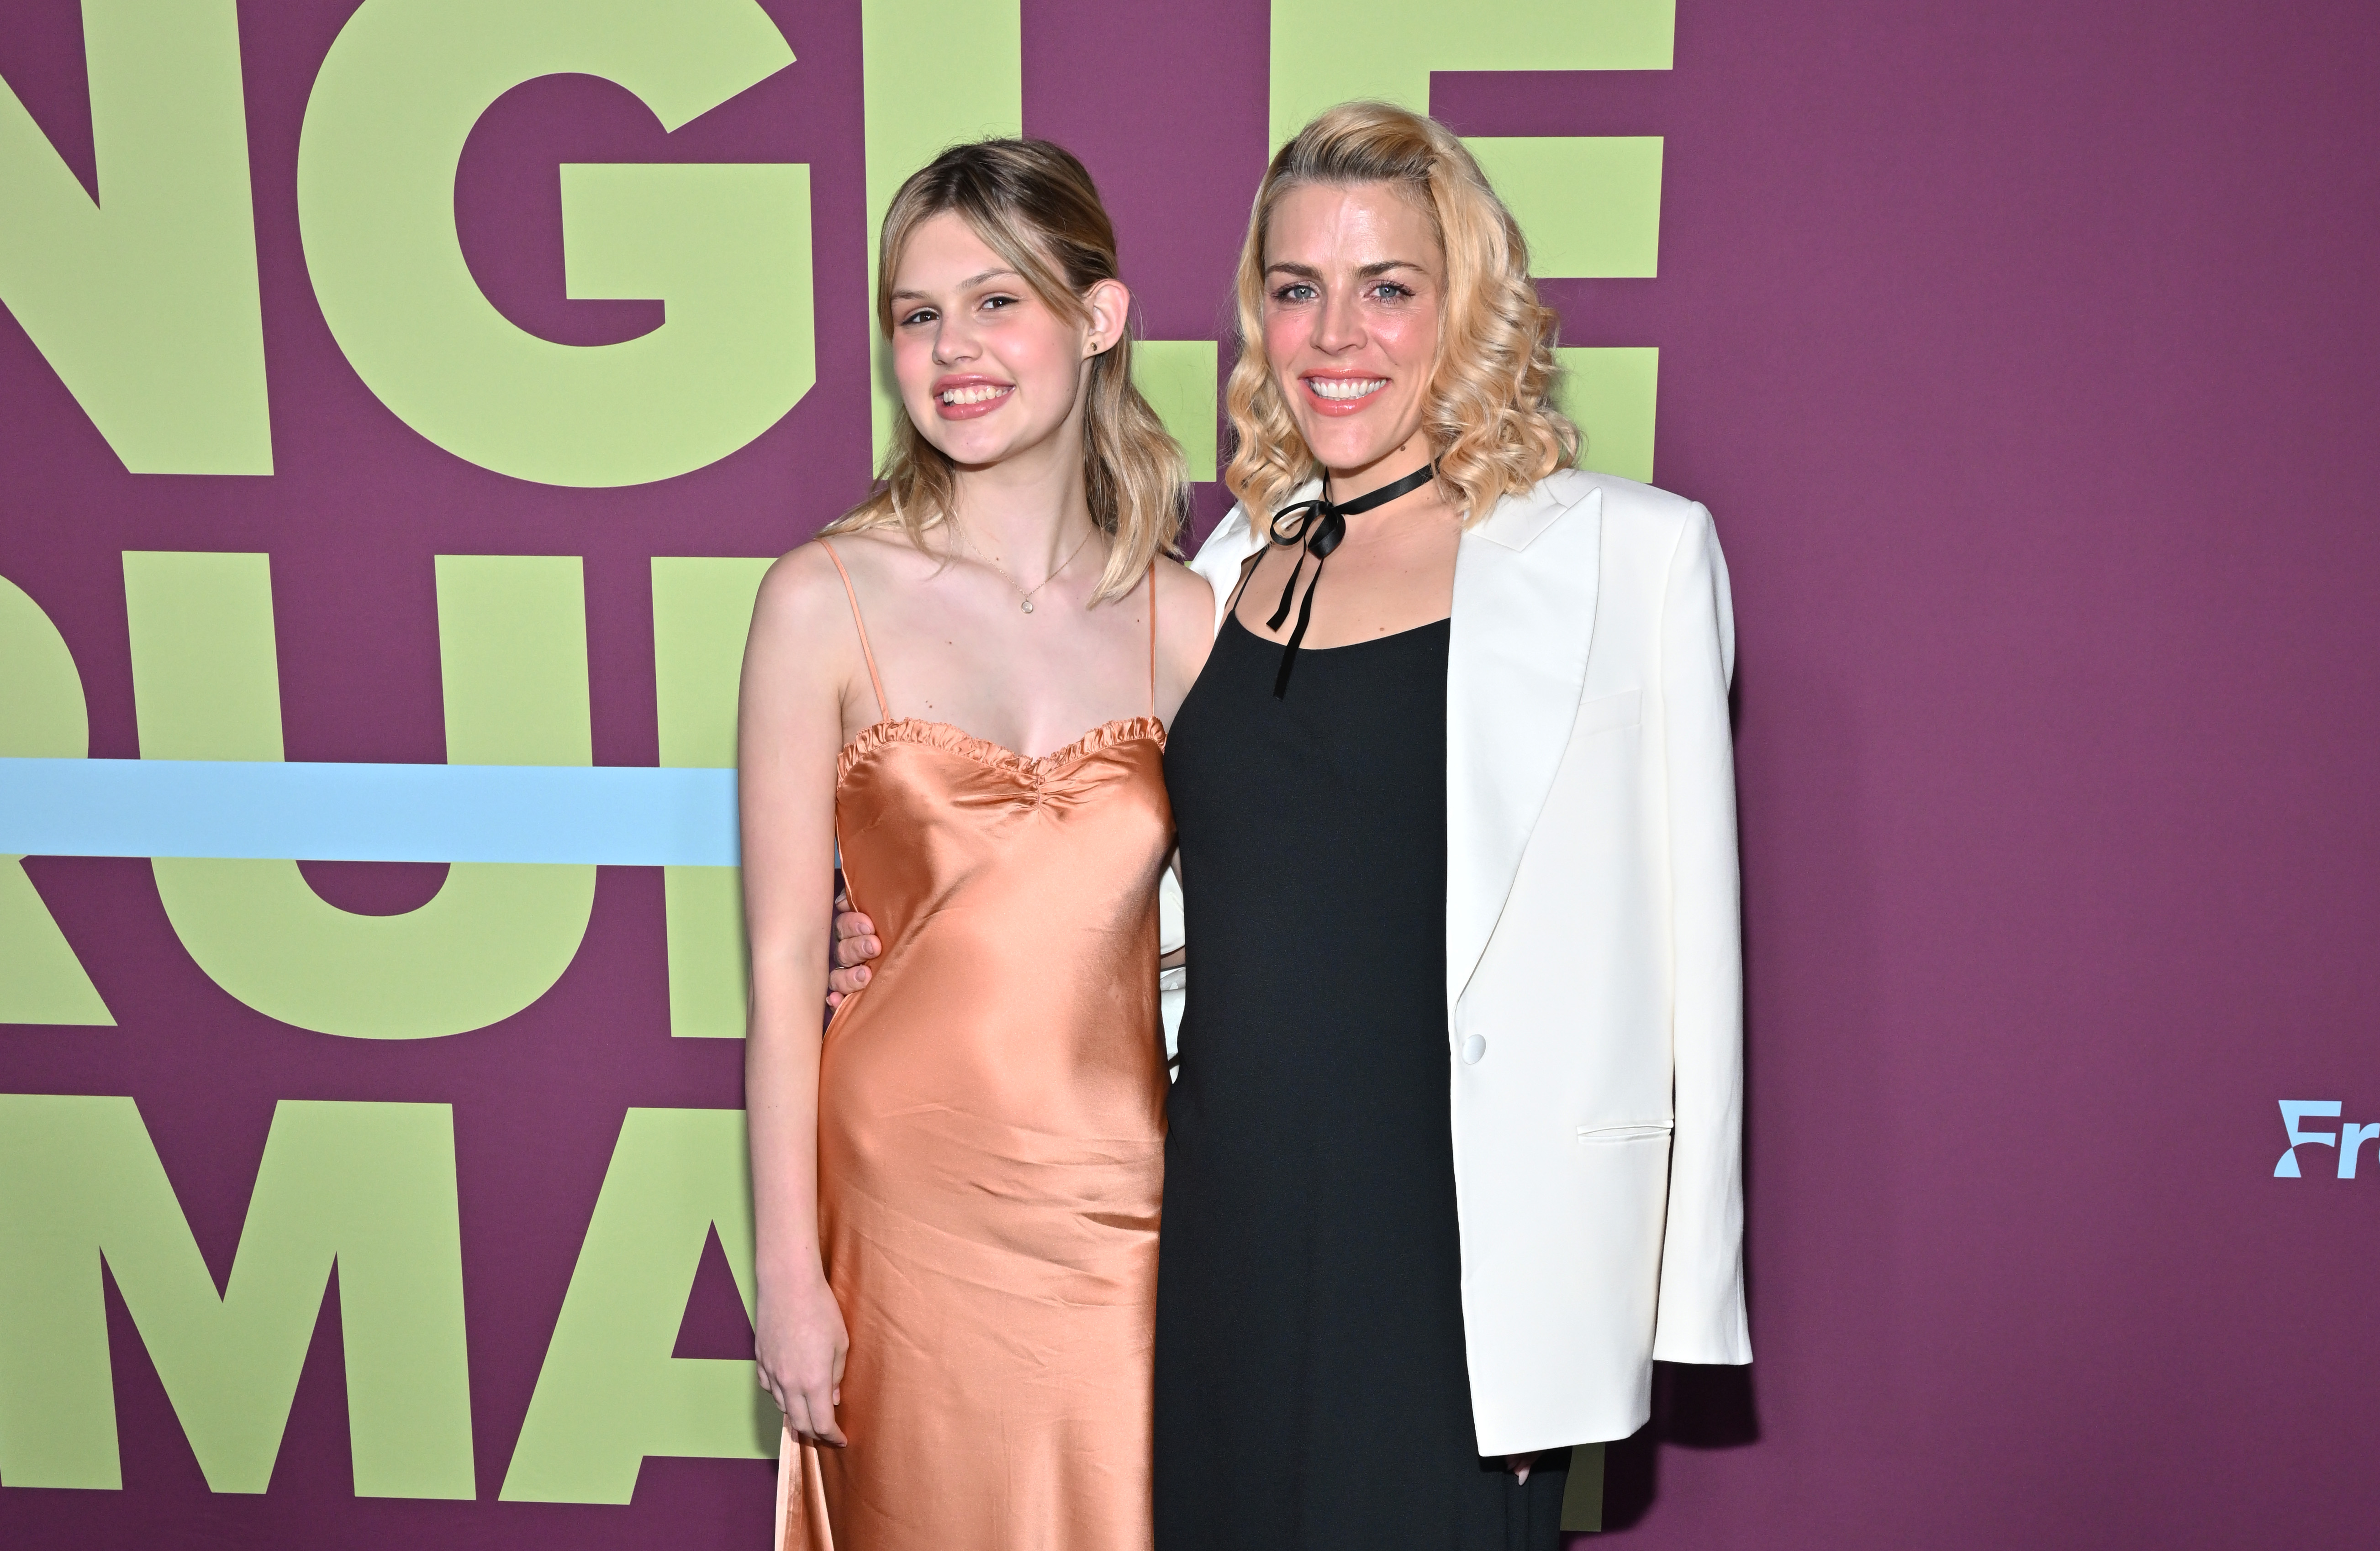 Birdie Leigh Silverstein and Busy Philipps at the season 2 premiere of "Single Drunk Female" on April 11, 2023, in New York City. | Source: Getty Images